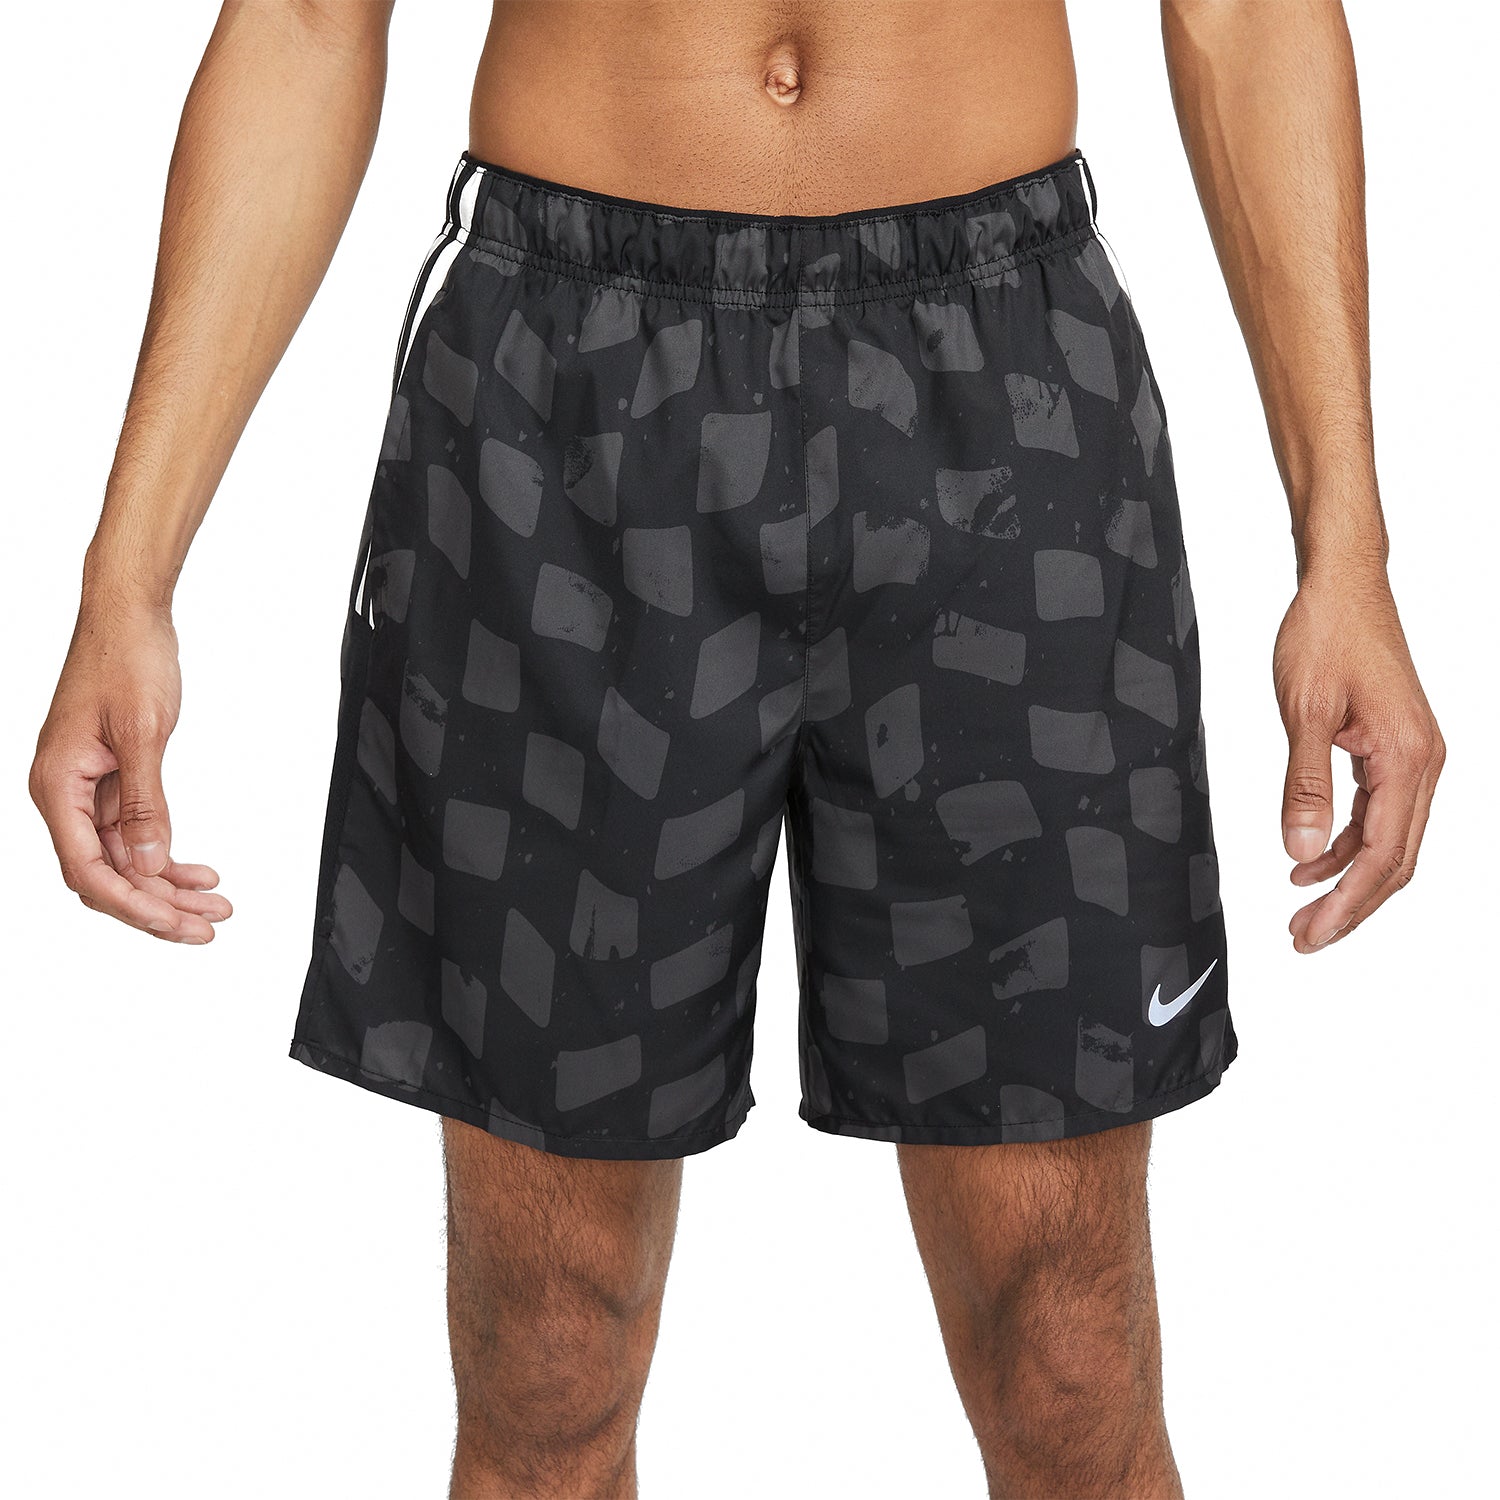 NIKE BRIEF-LINED GRAPHIC CHALLENGER SHORTS - BLACK